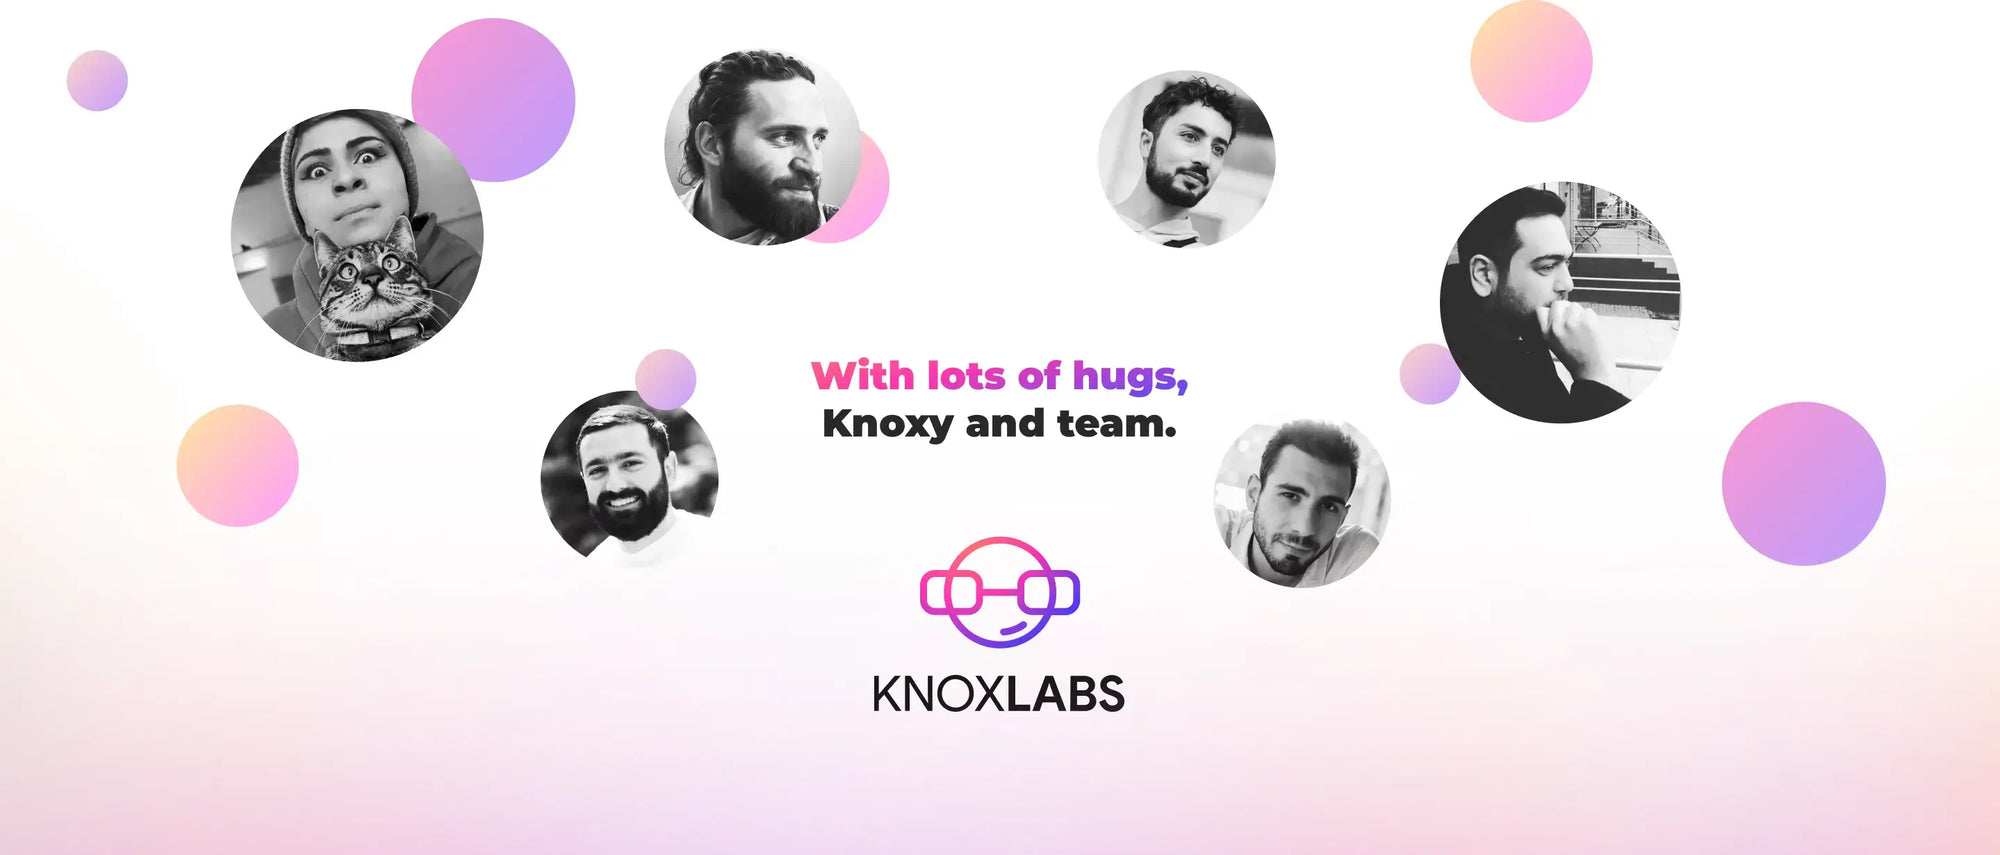 Knoxlabs team image on about page Knoxlabs log and lots of hugs by Knoxy